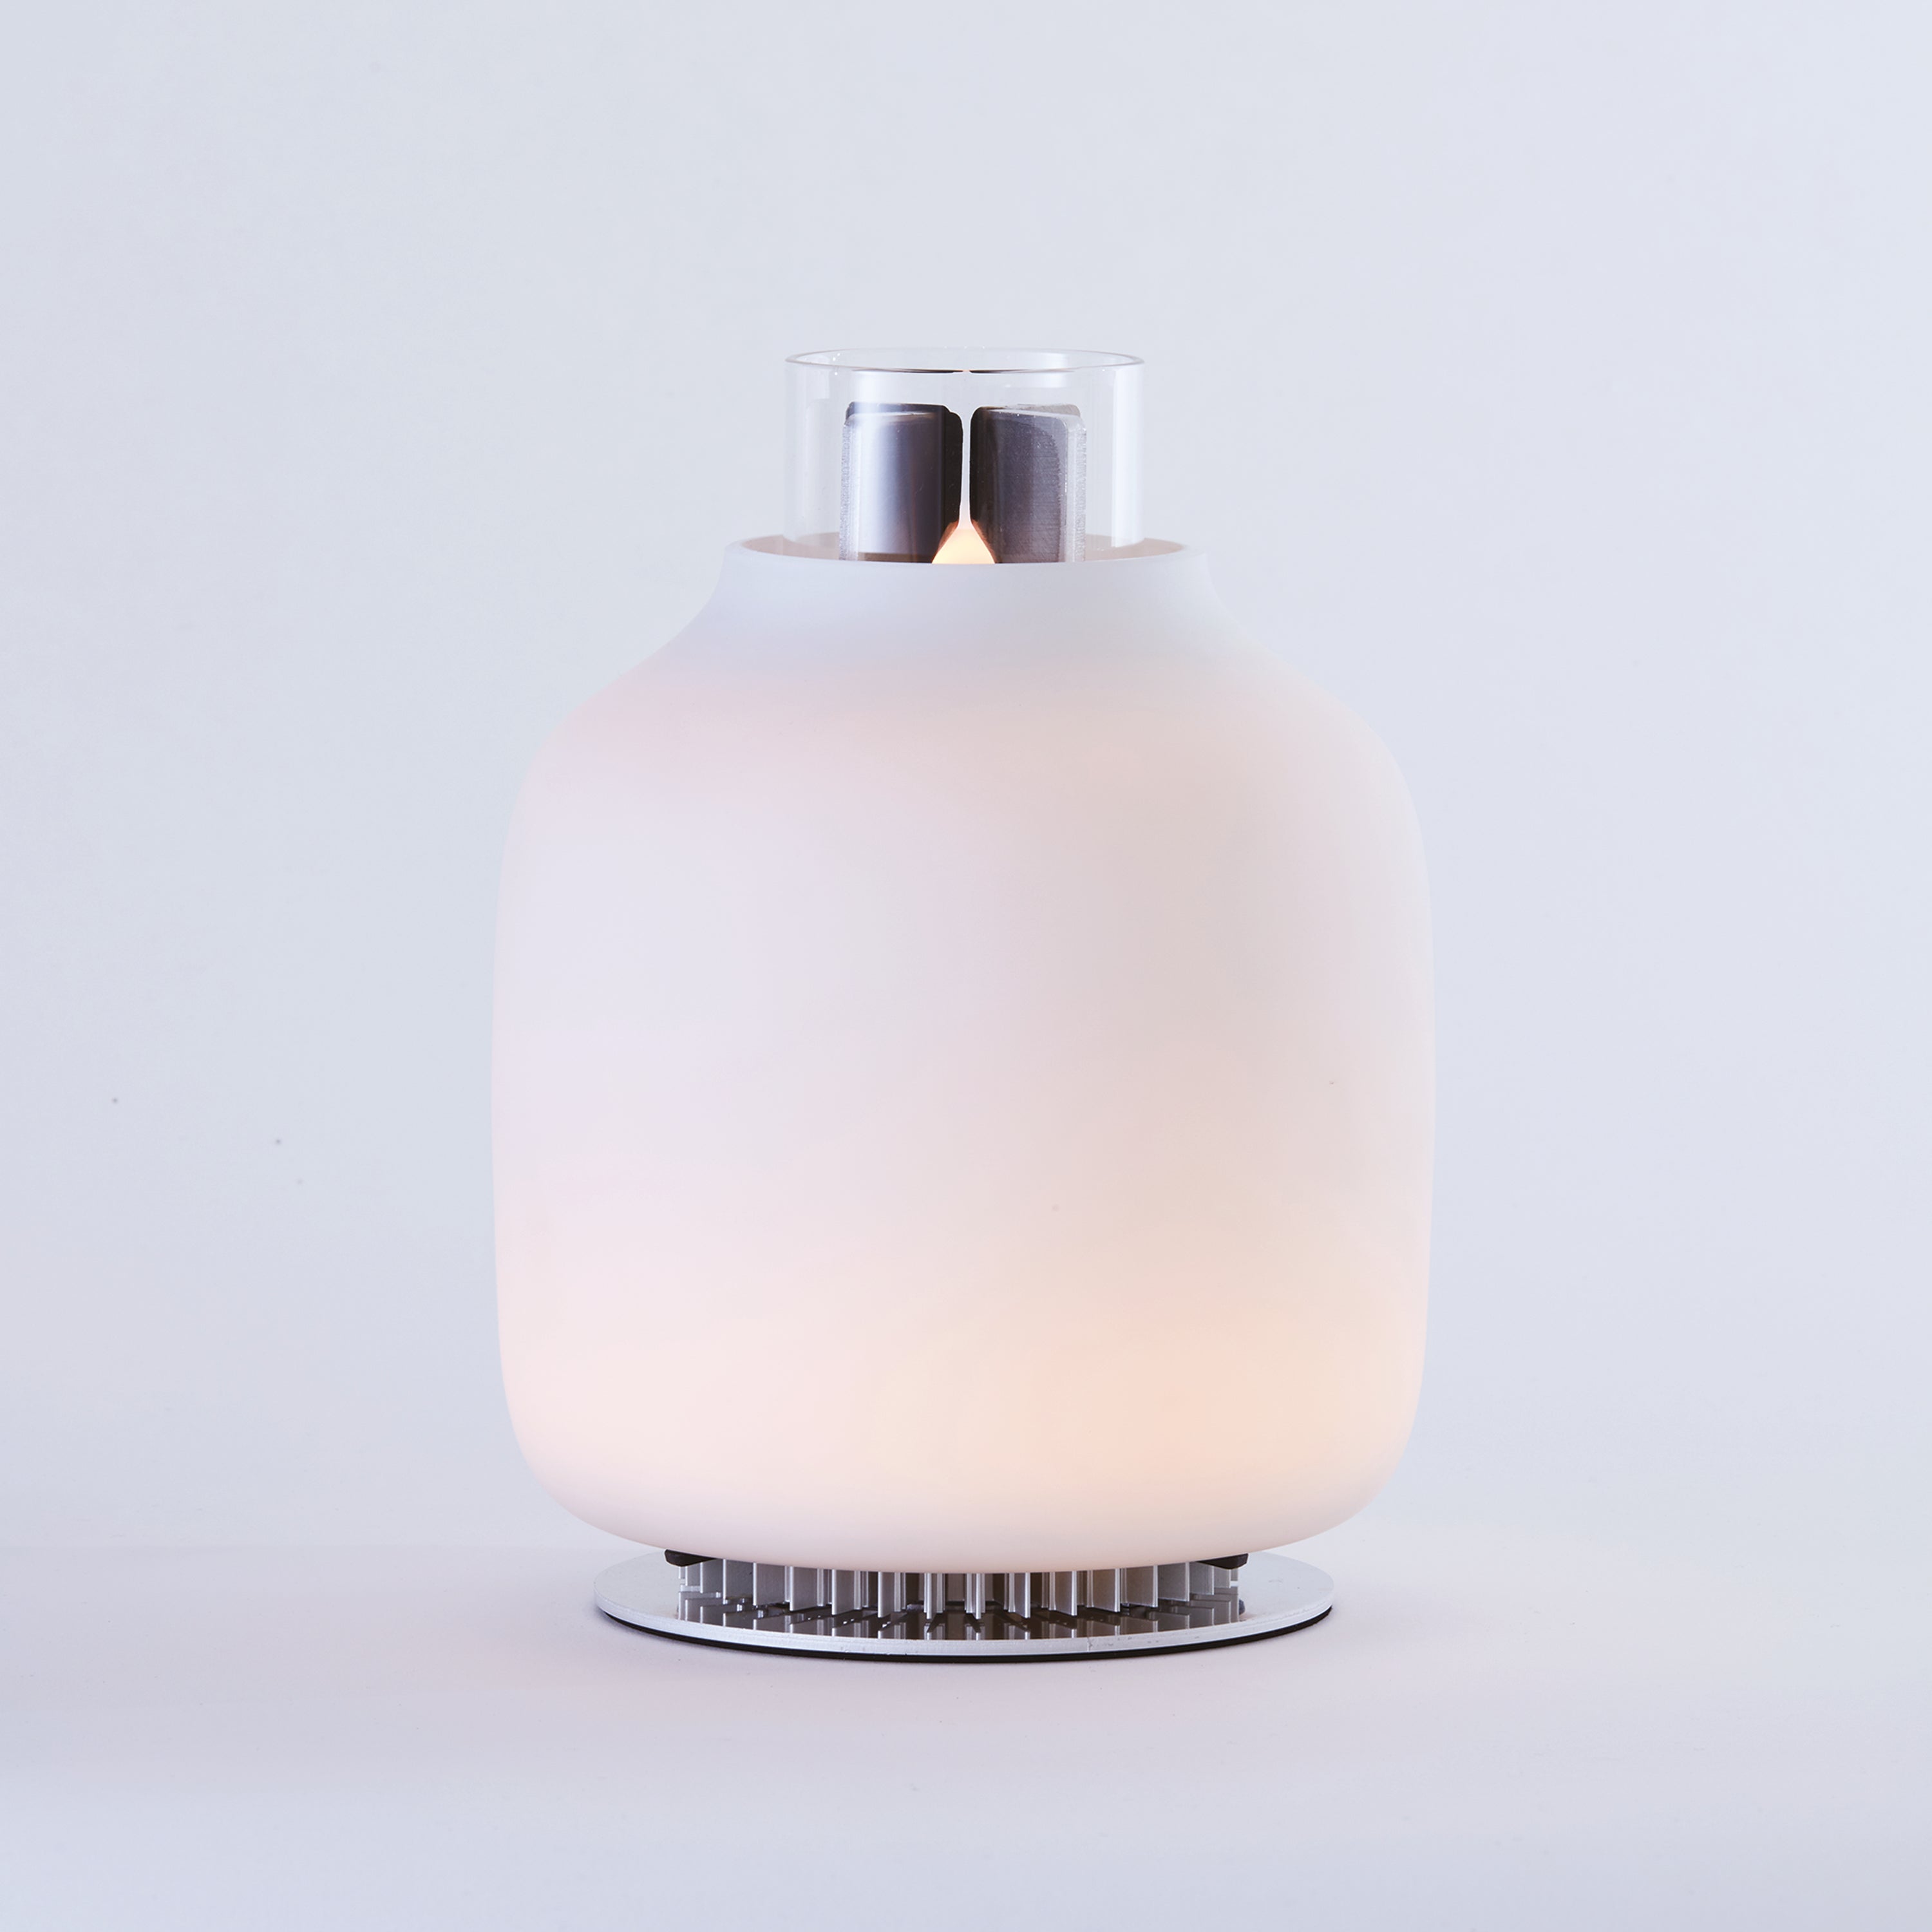 Candela Table Lamp with USB Charging Port